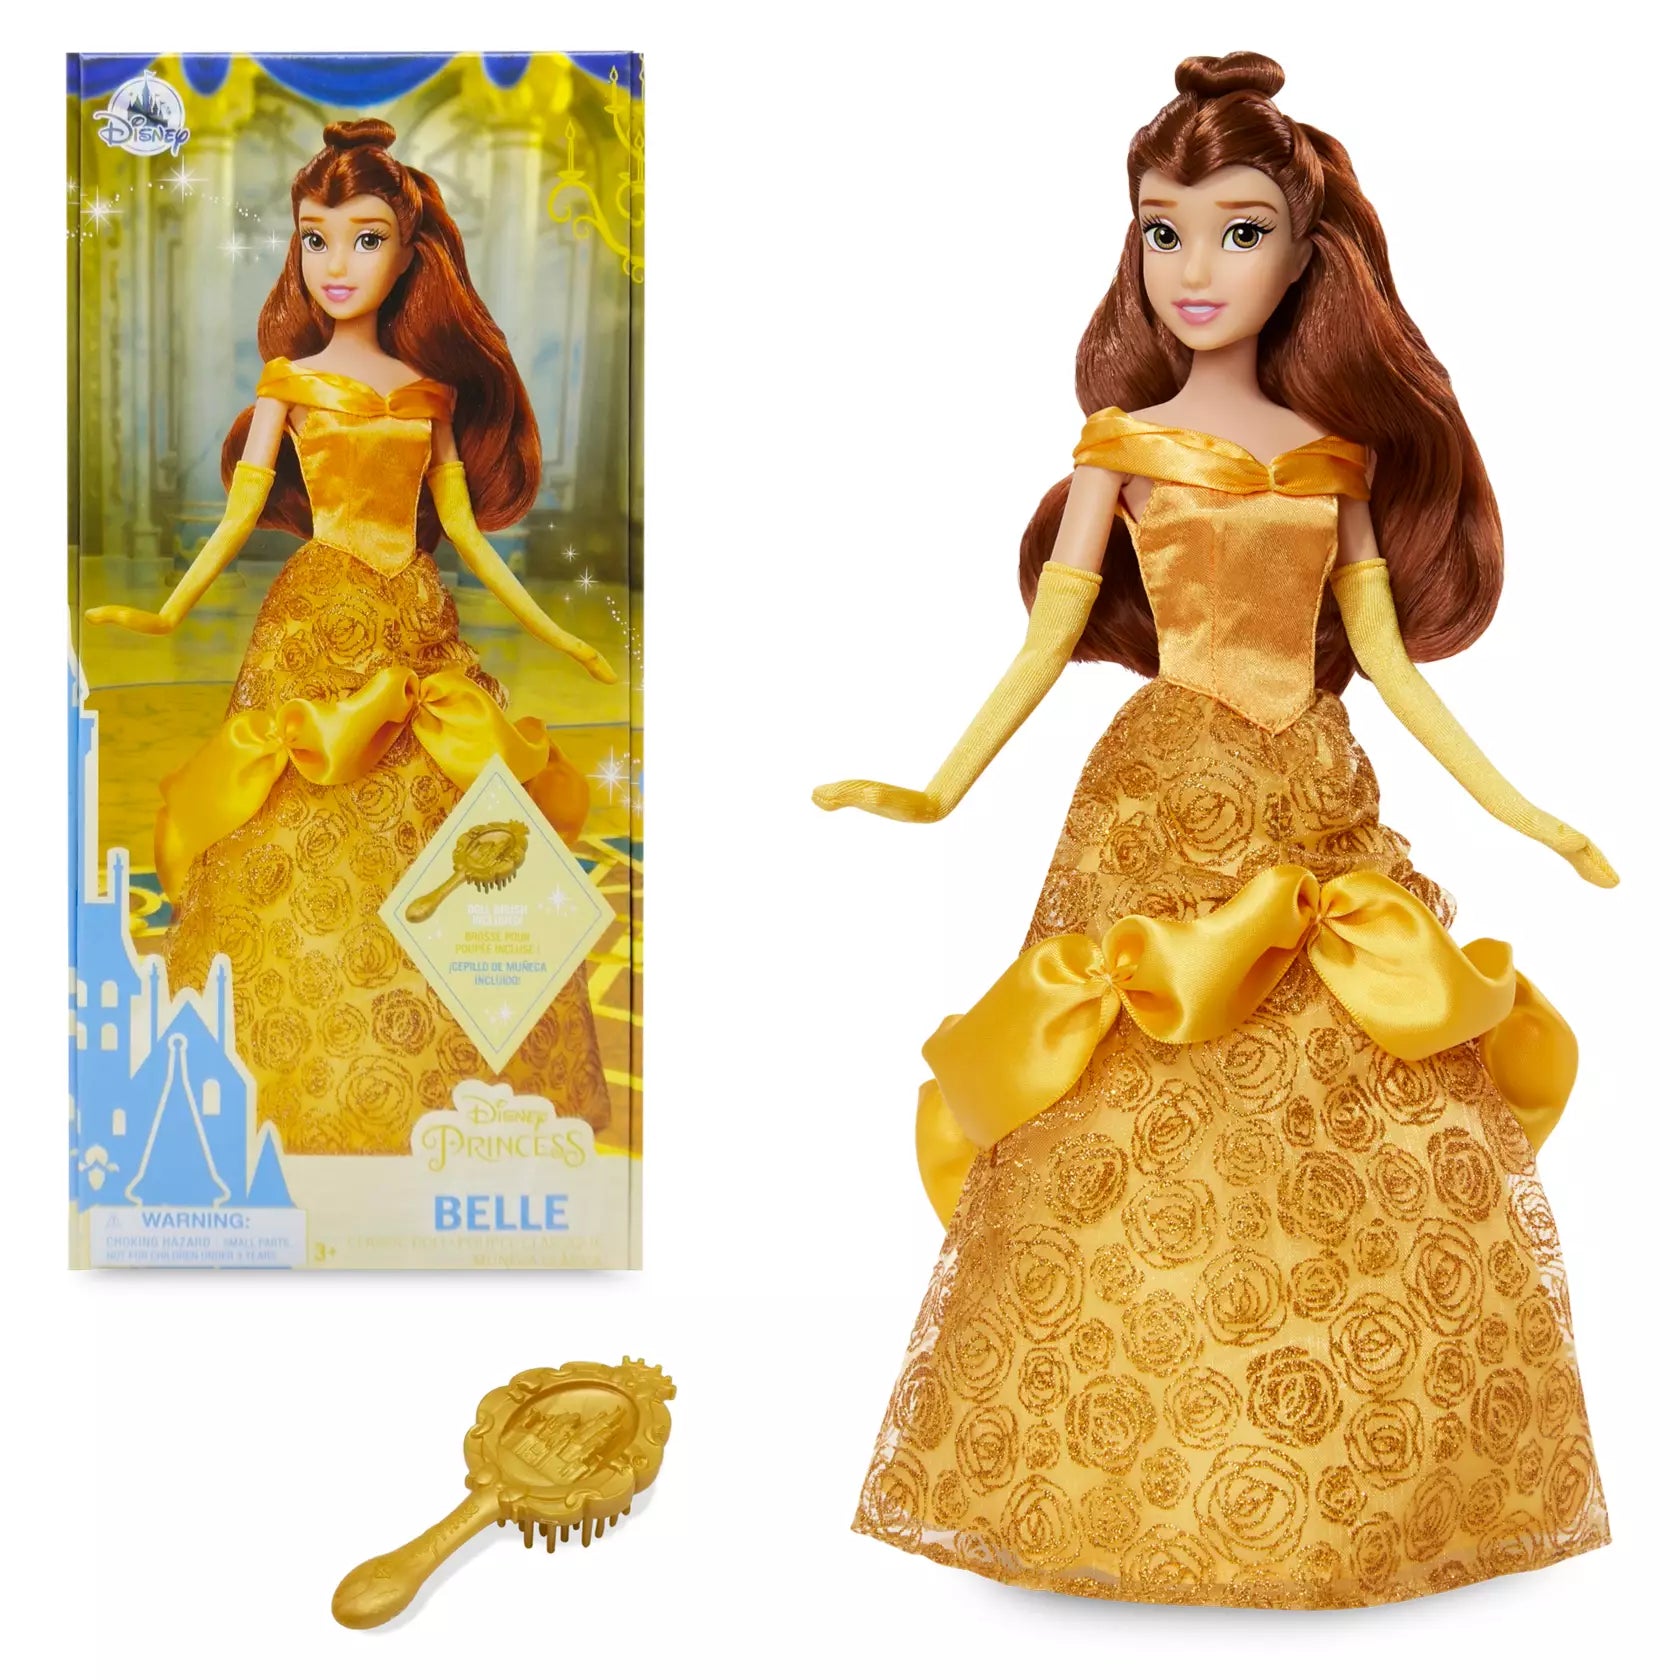 Disney Belle Classic Doll – Beauty and the Beast - BumbleToys - 5-7 Years, Belle, Disney Princess, Fashion Dolls & Accessories, Girls, Pre-Order